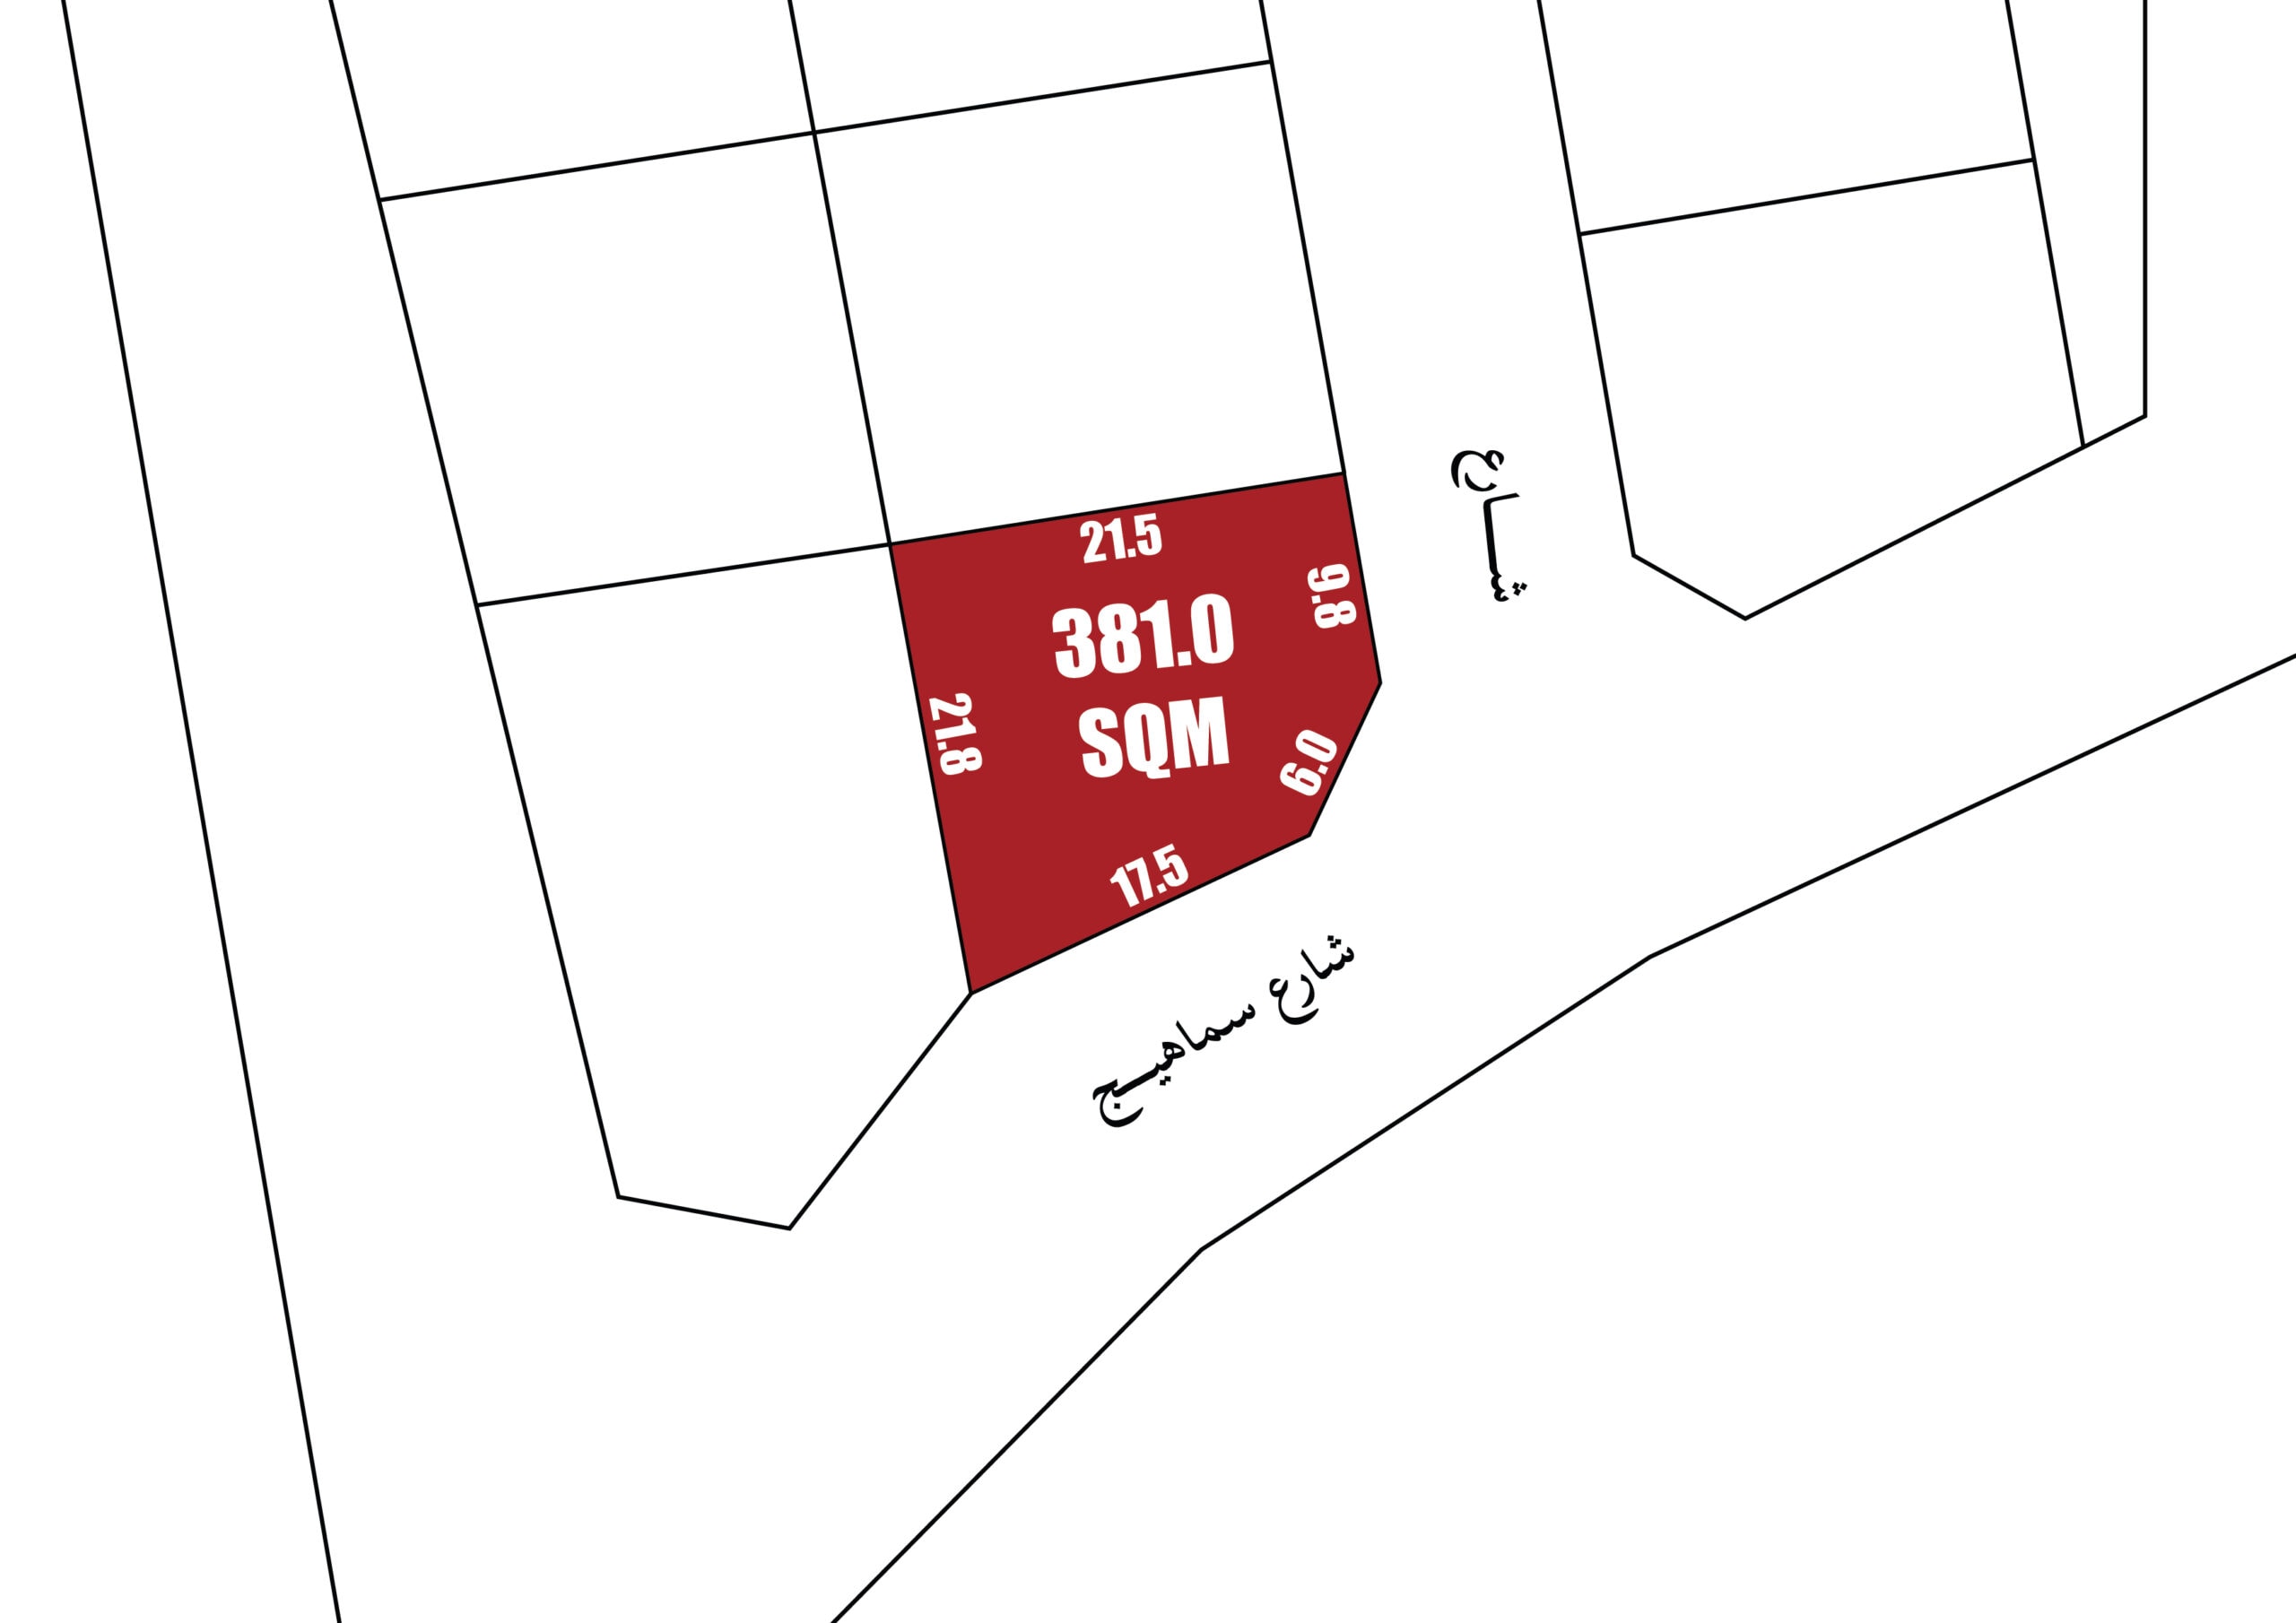 Plot layout with auto draft dimensions and area in square meters highlighted in red.